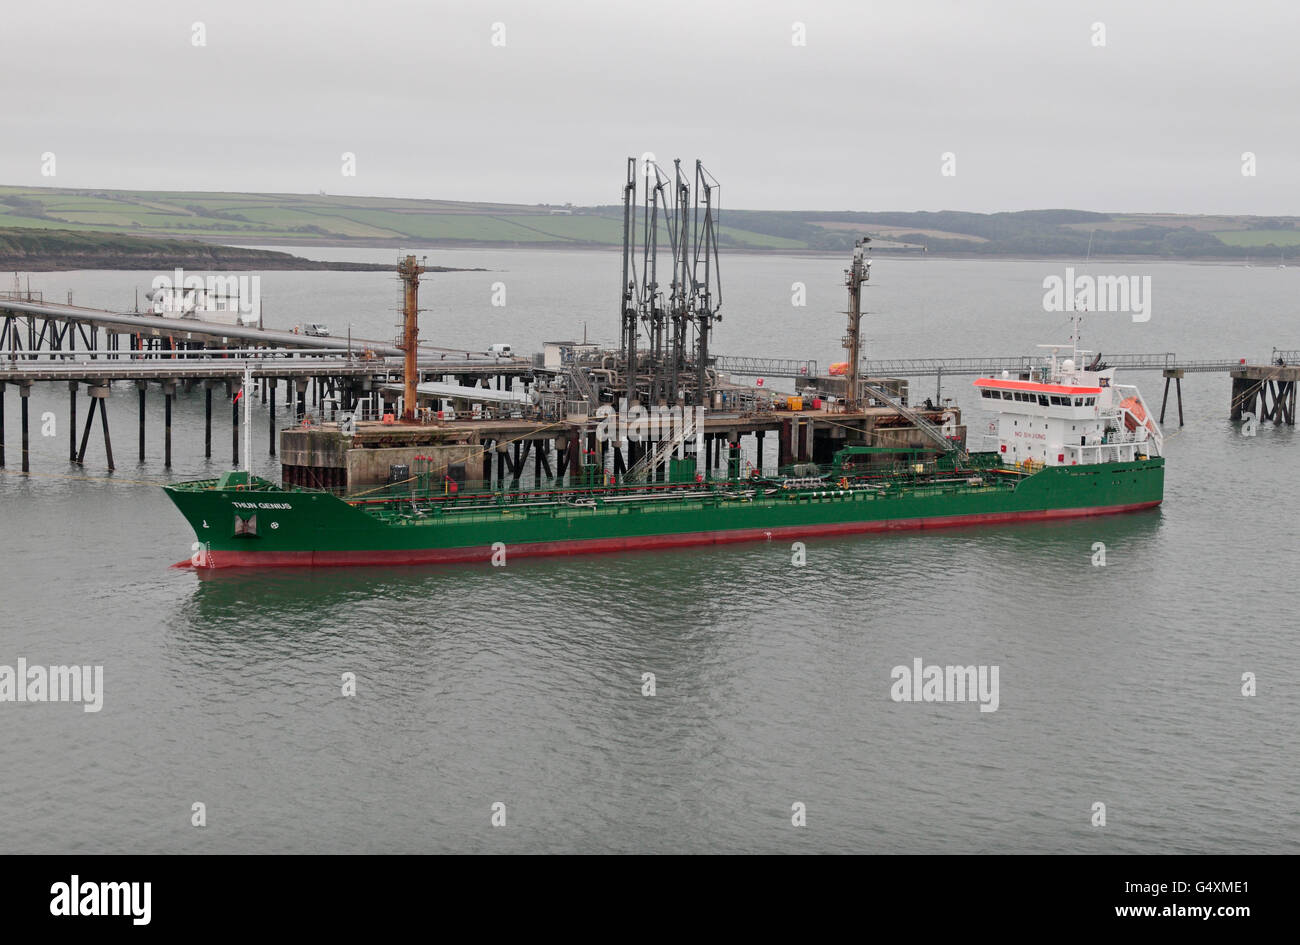 The 'Thun Genius' chemical/oil products tanker in Milford Haven, Pembrokeshire, Wales. Stock Photo